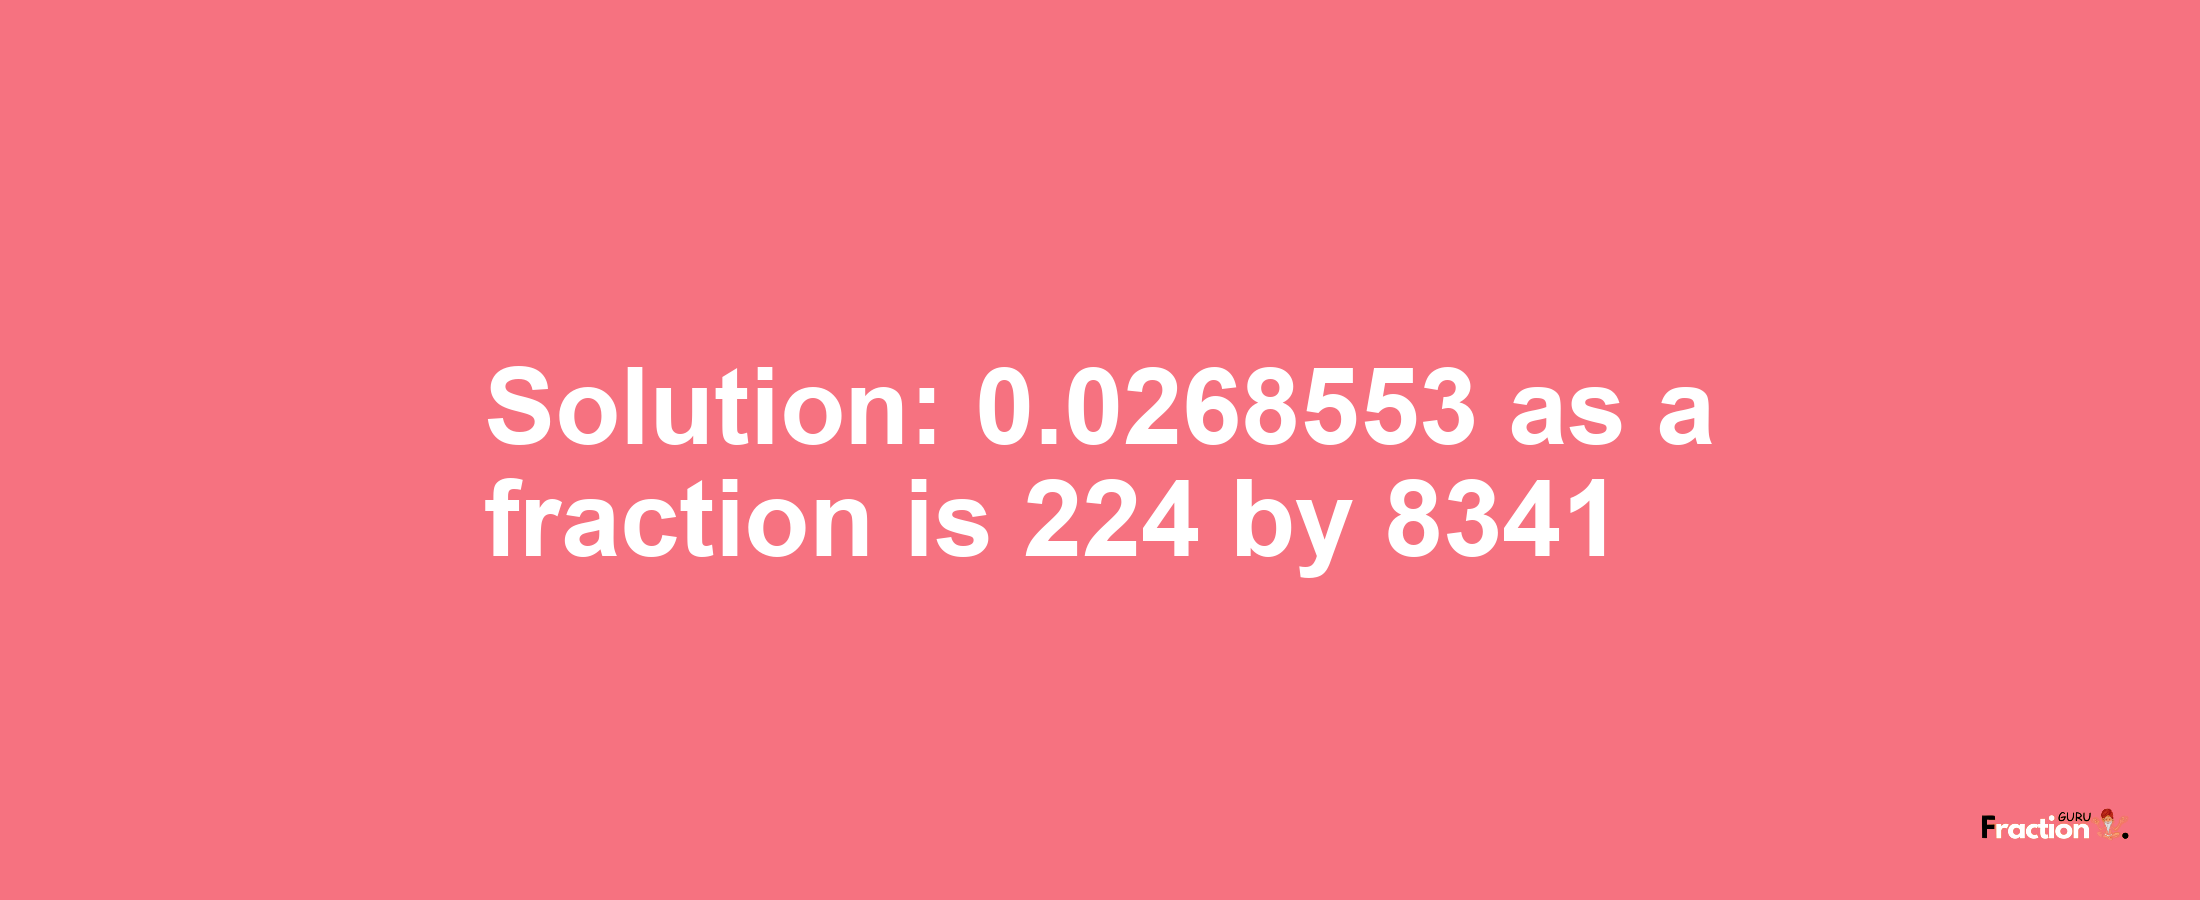 Solution:0.0268553 as a fraction is 224/8341